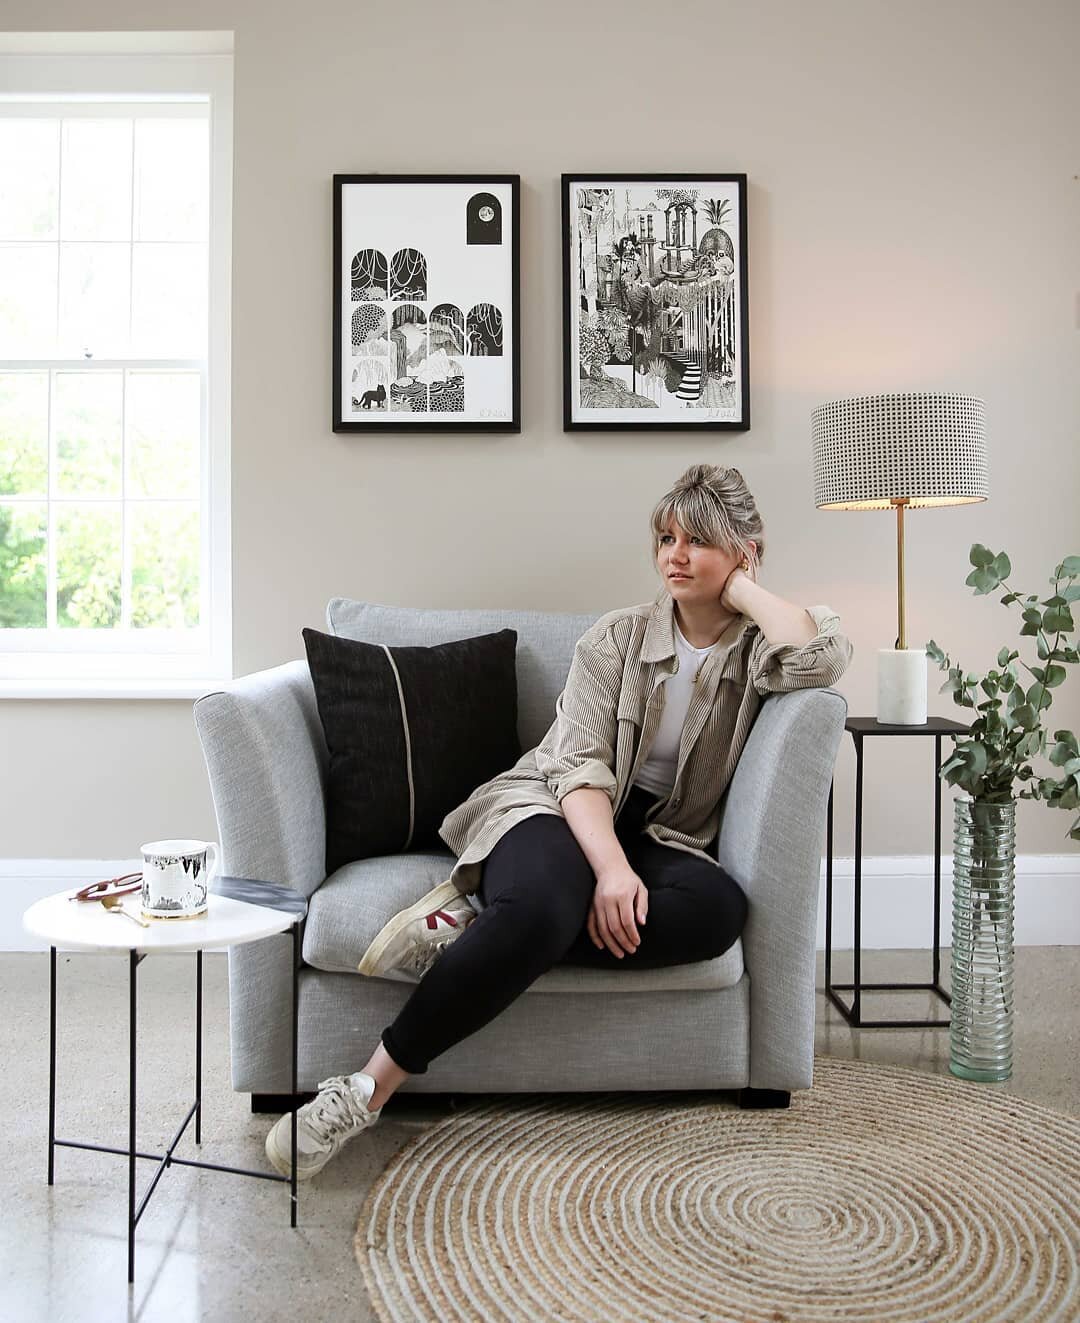 In collaboration with @tlchome.co 
.
The Belgrave Armchair, designed to perfectly compliment your very own Abi Overland art prints with its elegant design. As part of its launch, TLC are kindly offering 20% off your first order with code ABIOVERLAND 